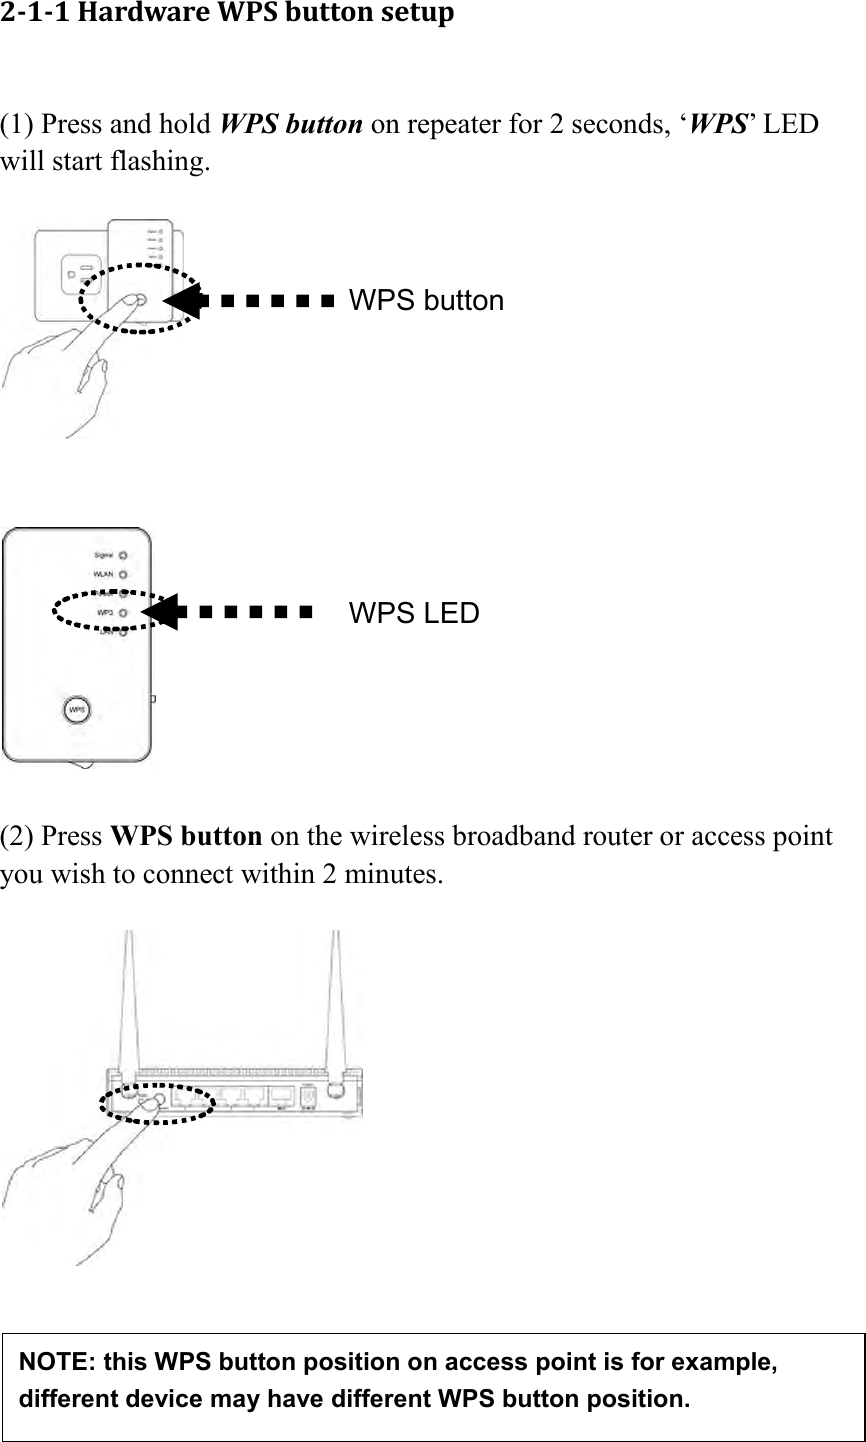  10  2-1-1 Hardware WPS button setup  (1) Press and hold WPS button on repeater for 2 seconds, ‘WPS’ LED will start flashing.       (2) Press WPS button on the wireless broadband router or access point you wish to connect within 2 minutes.        WPS LED WPS button NOTE: this WPS button position on access point is for example, different device may have different WPS button position. 